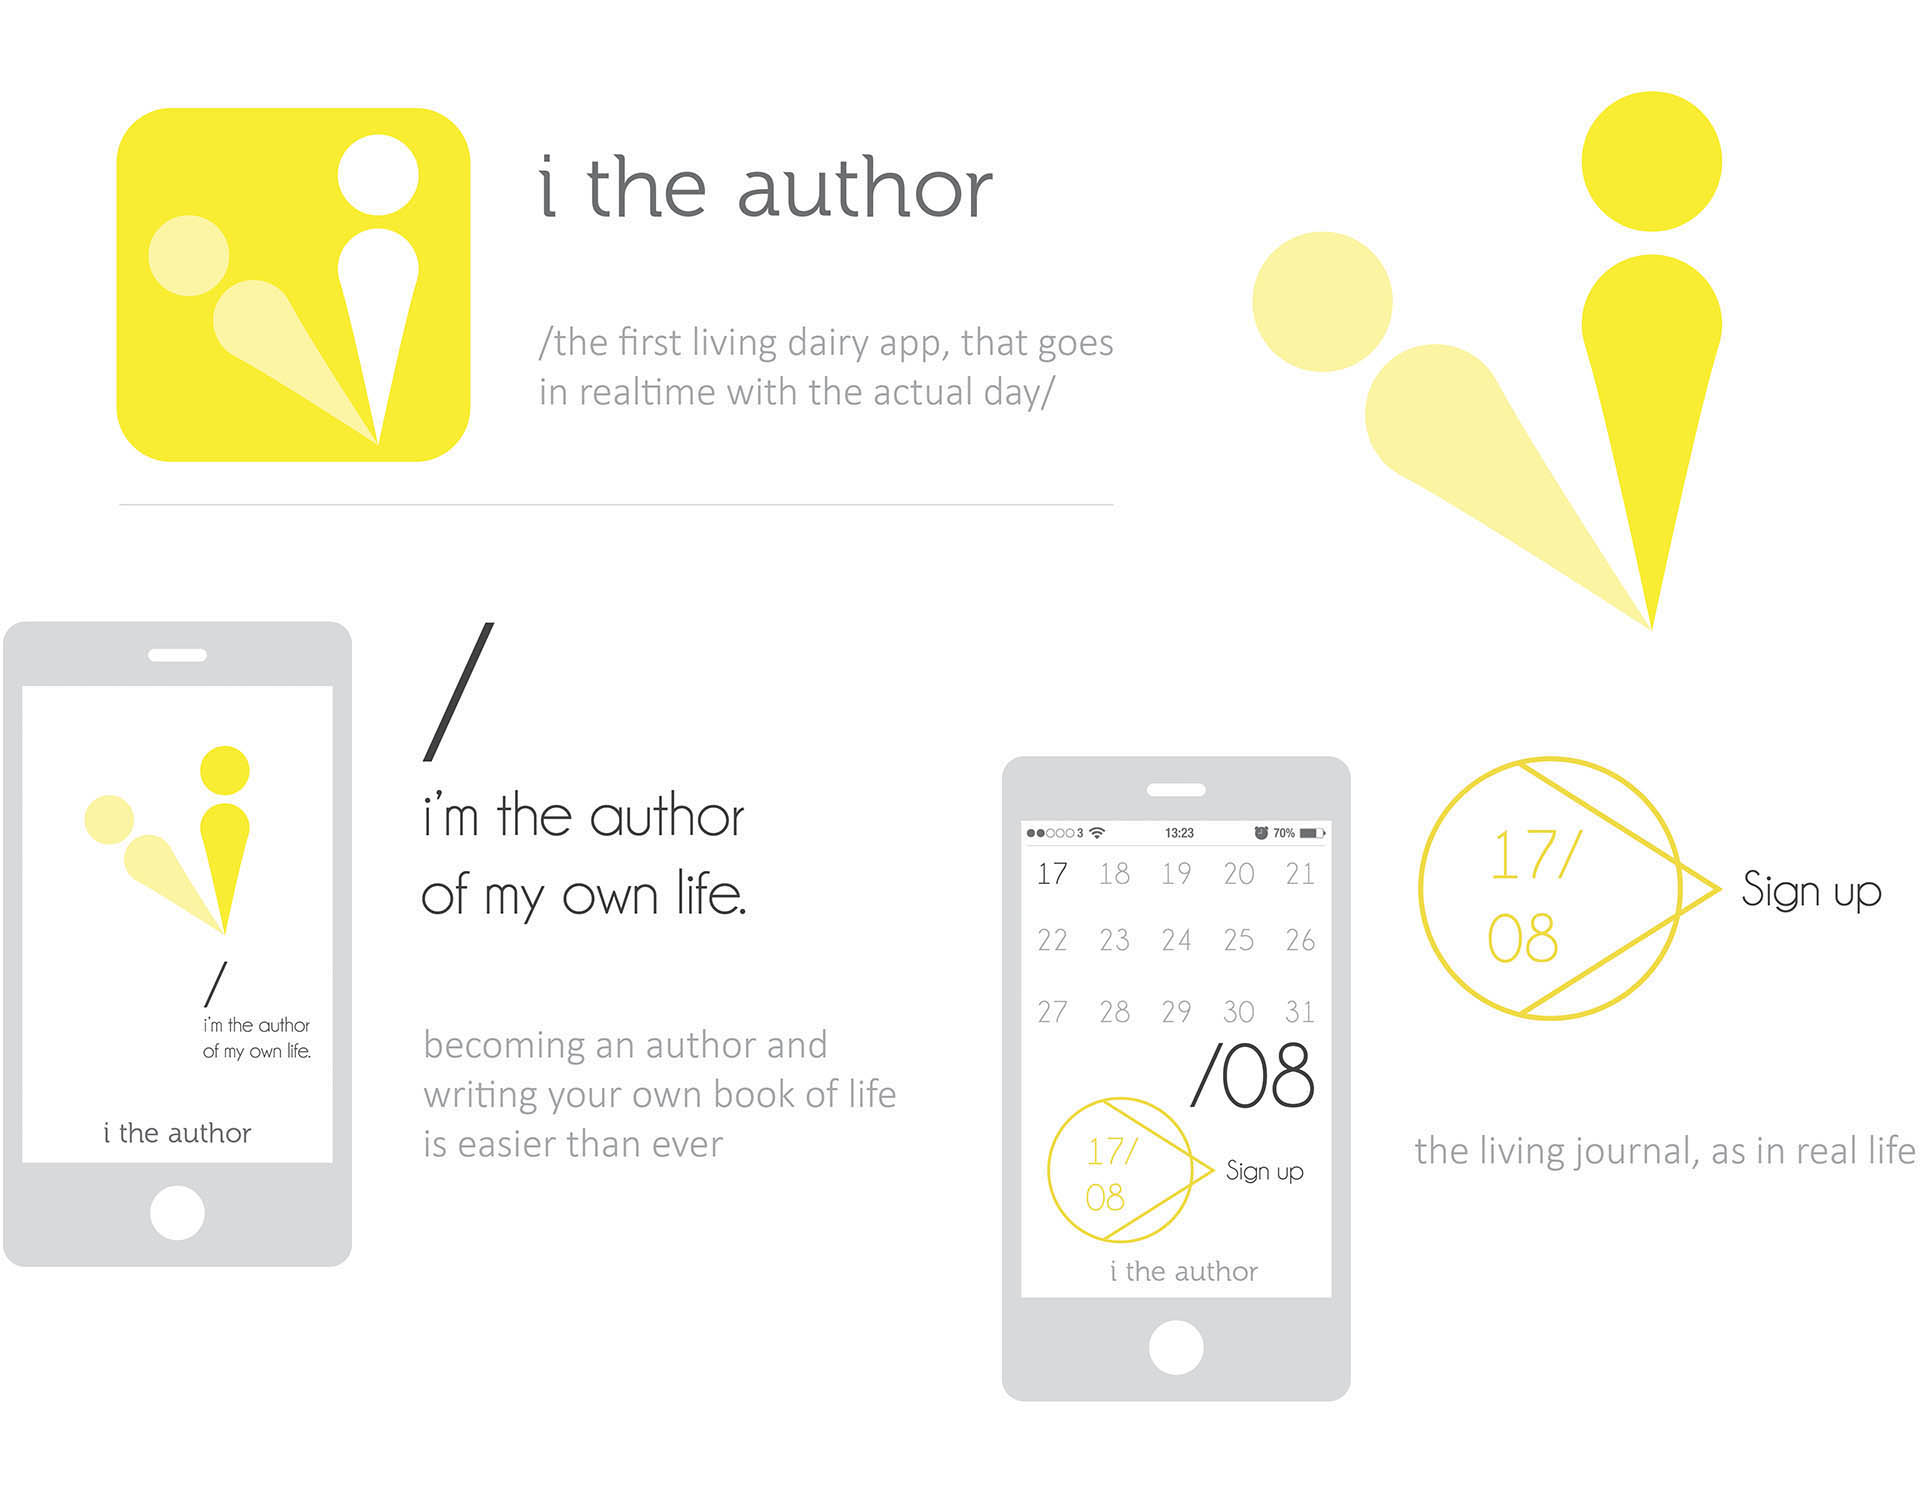 i the author, a living dairy app, that goes in realtime with the actual day